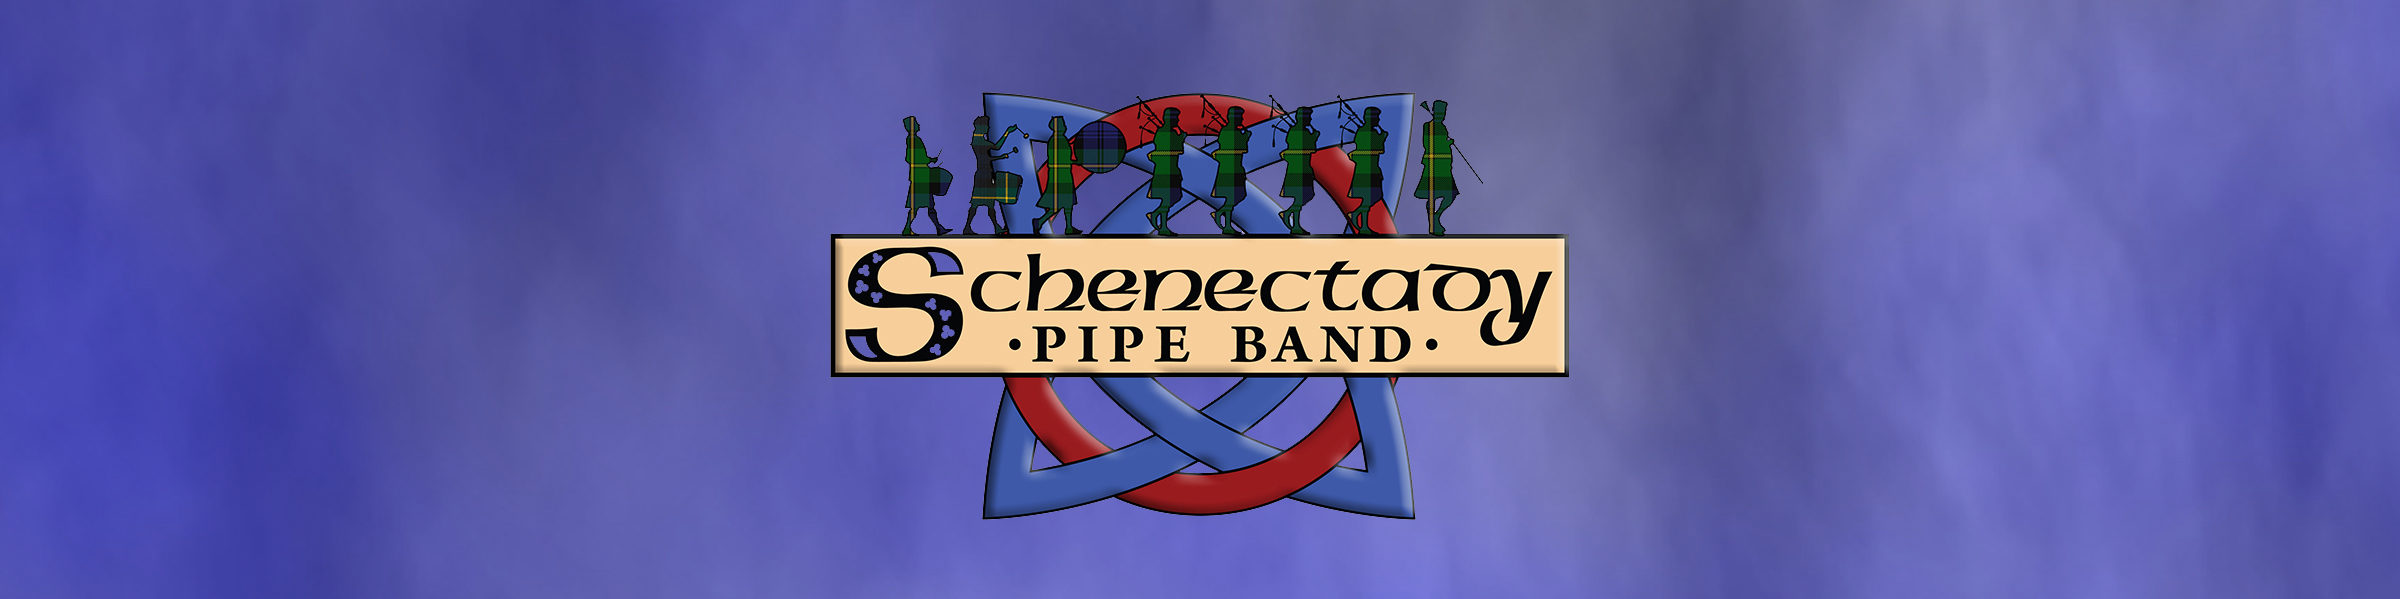 Schenectady Pipe Band